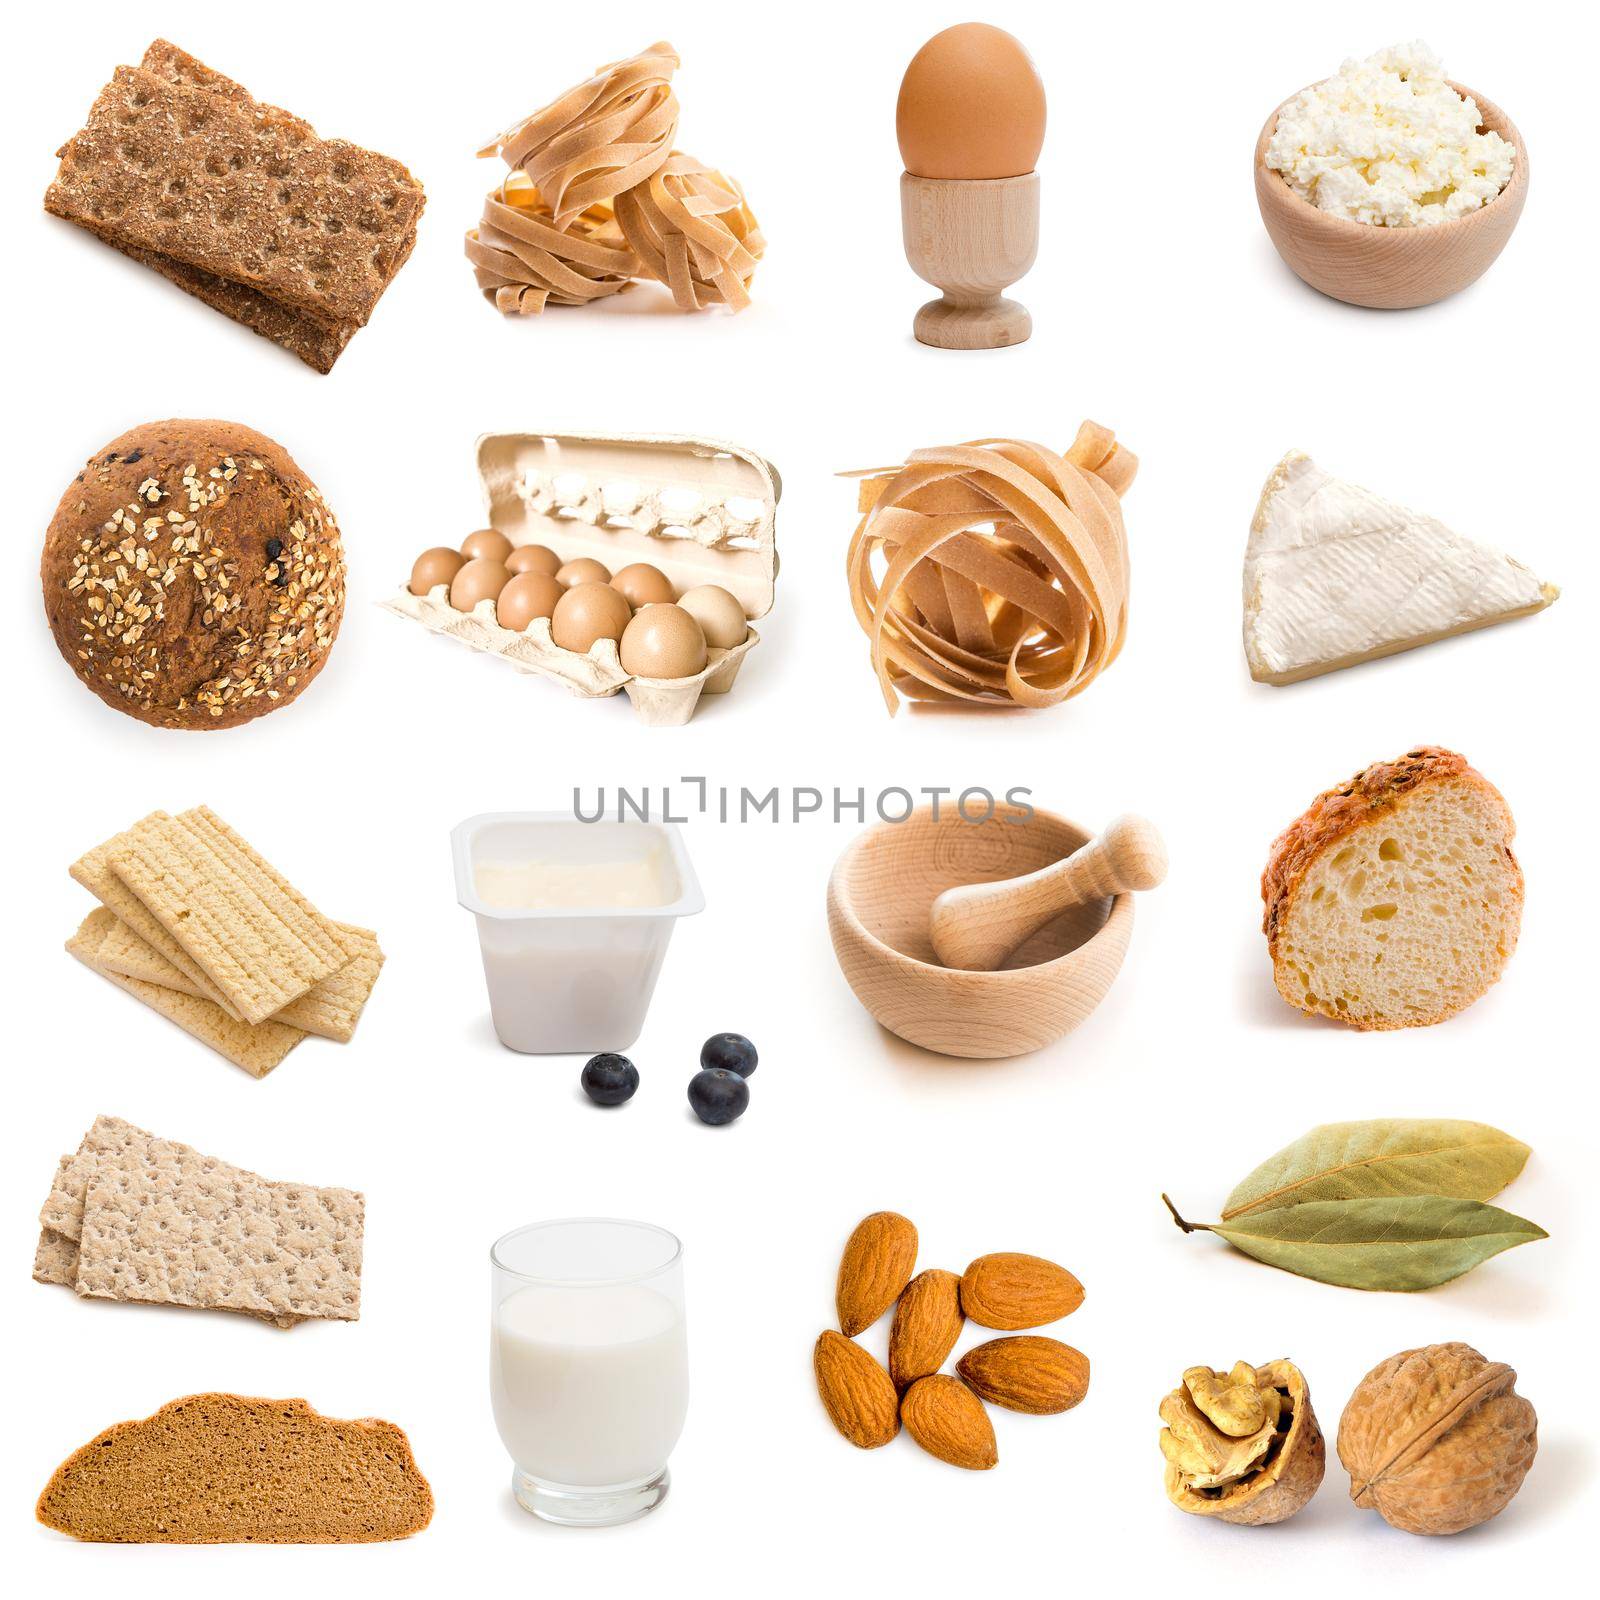 fitness products collage in brown color isolated on white background